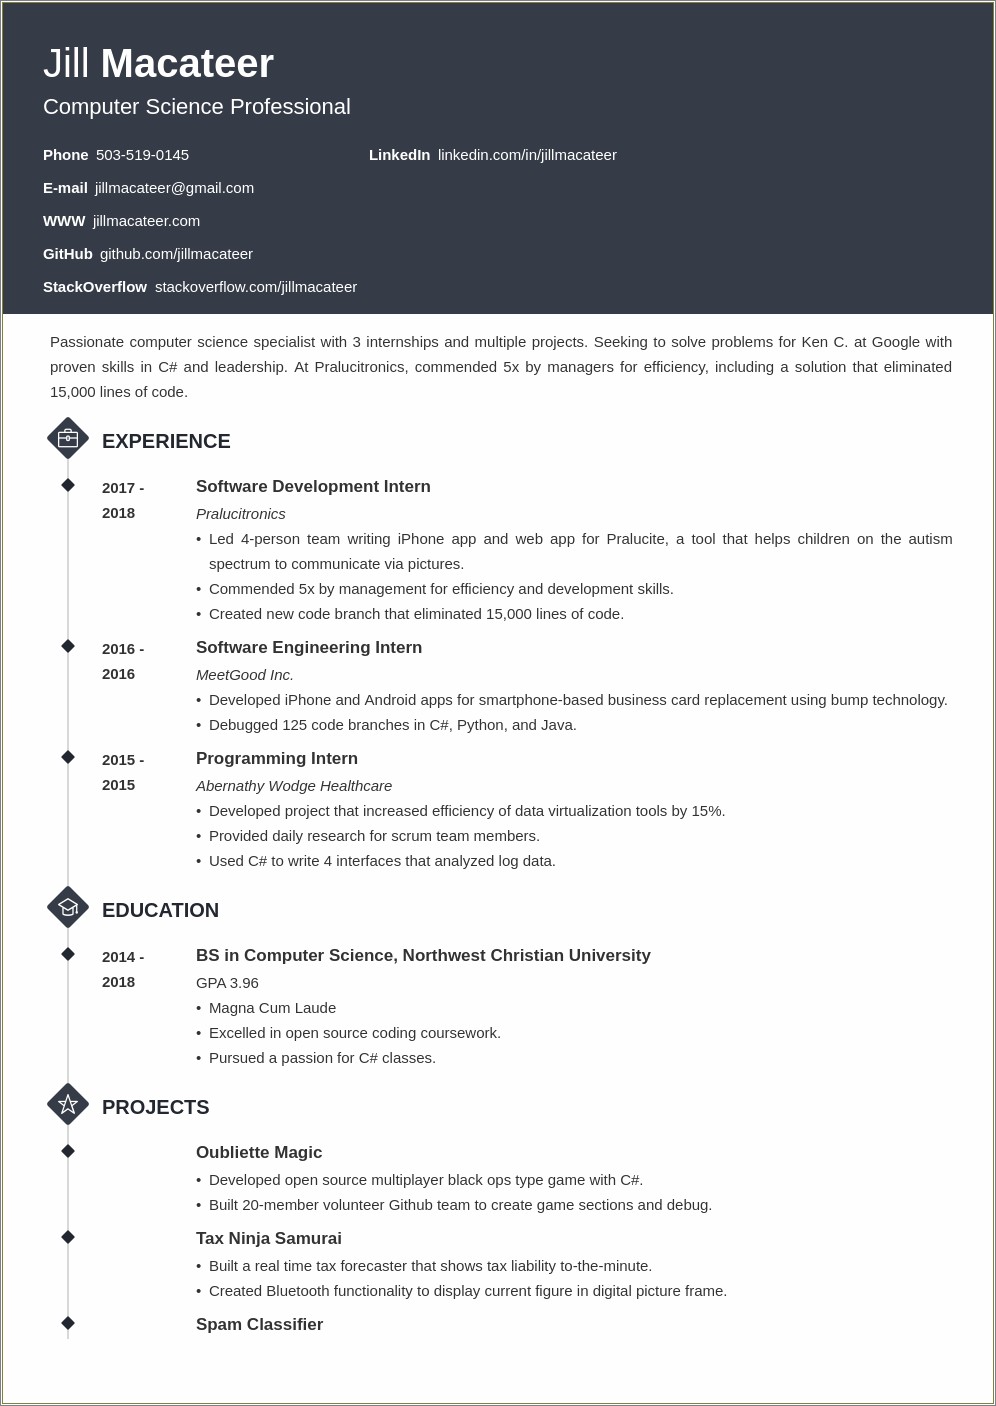 Best Computer Science Resume Professional Summary